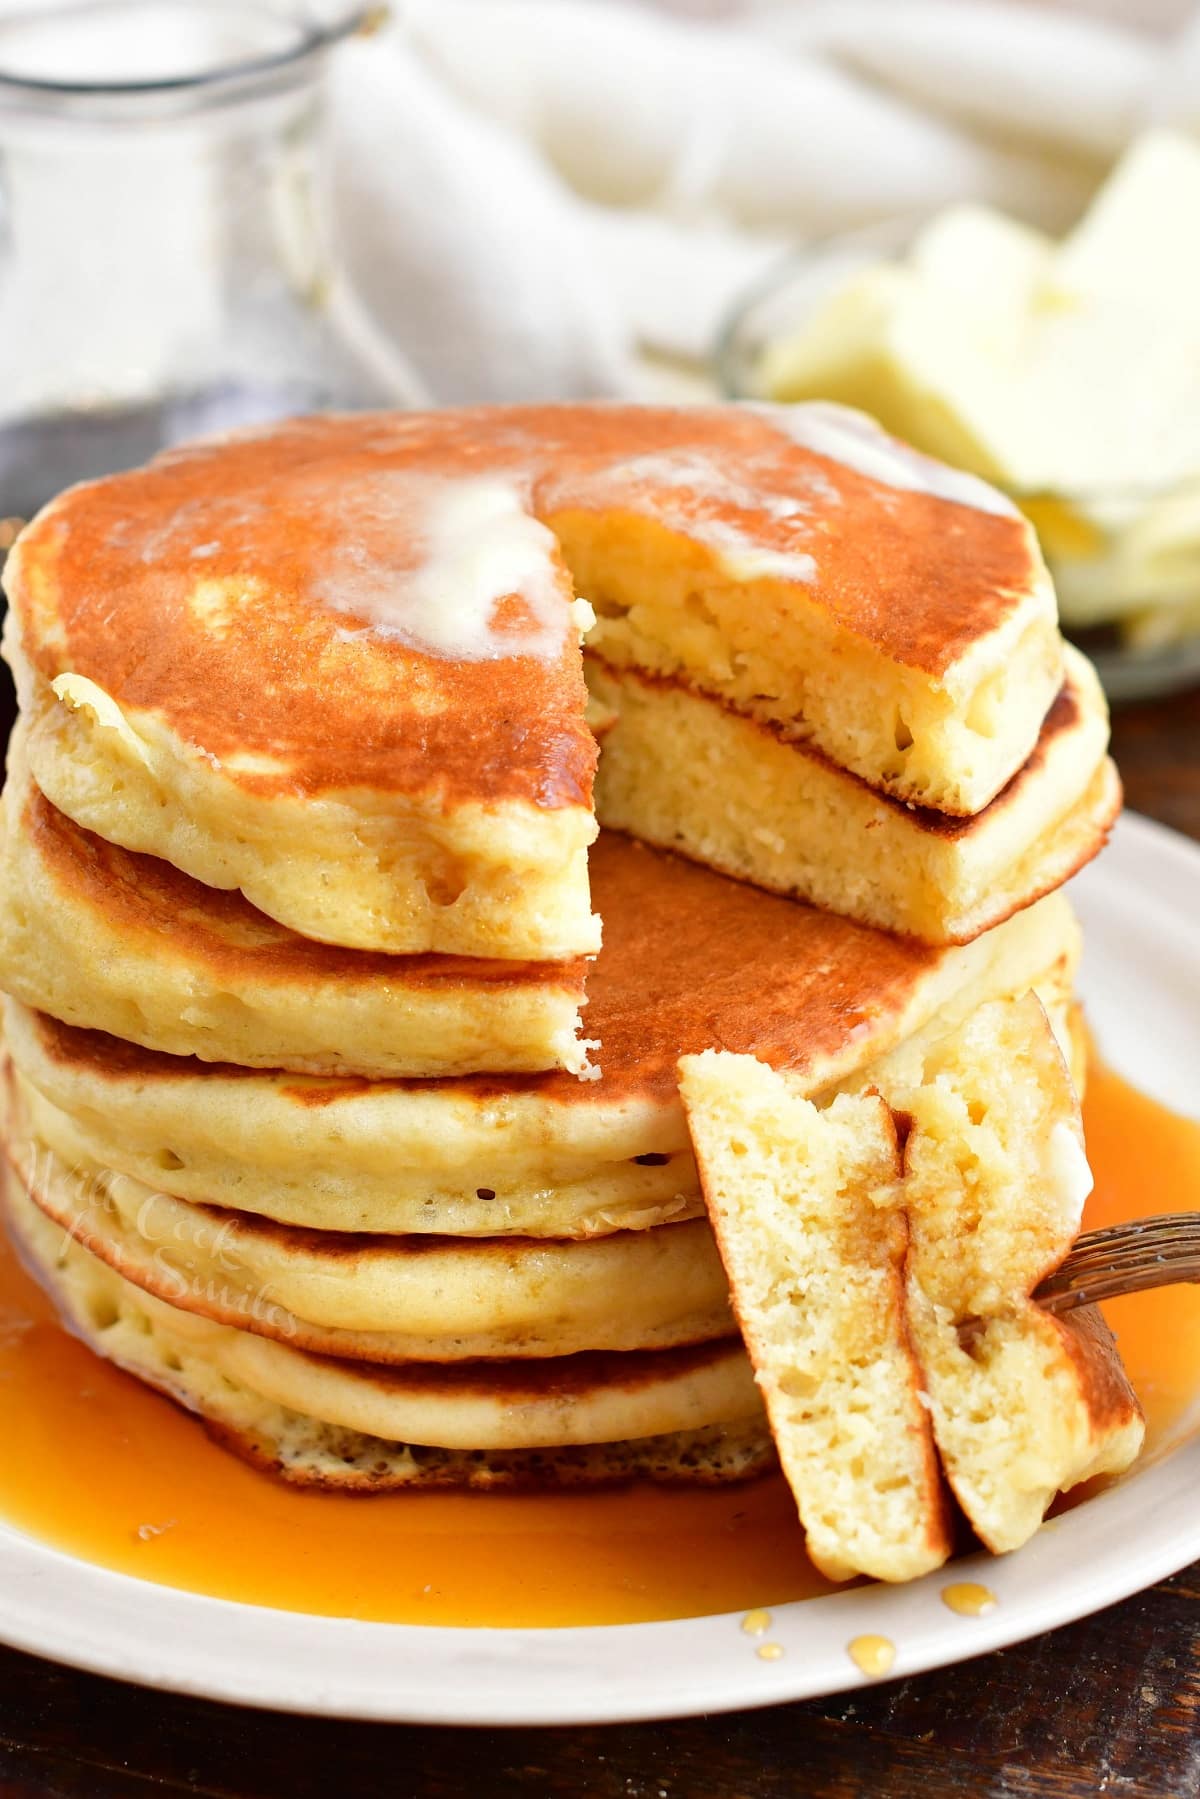 A bite sized portion of pancakes has been taken from the stack. 